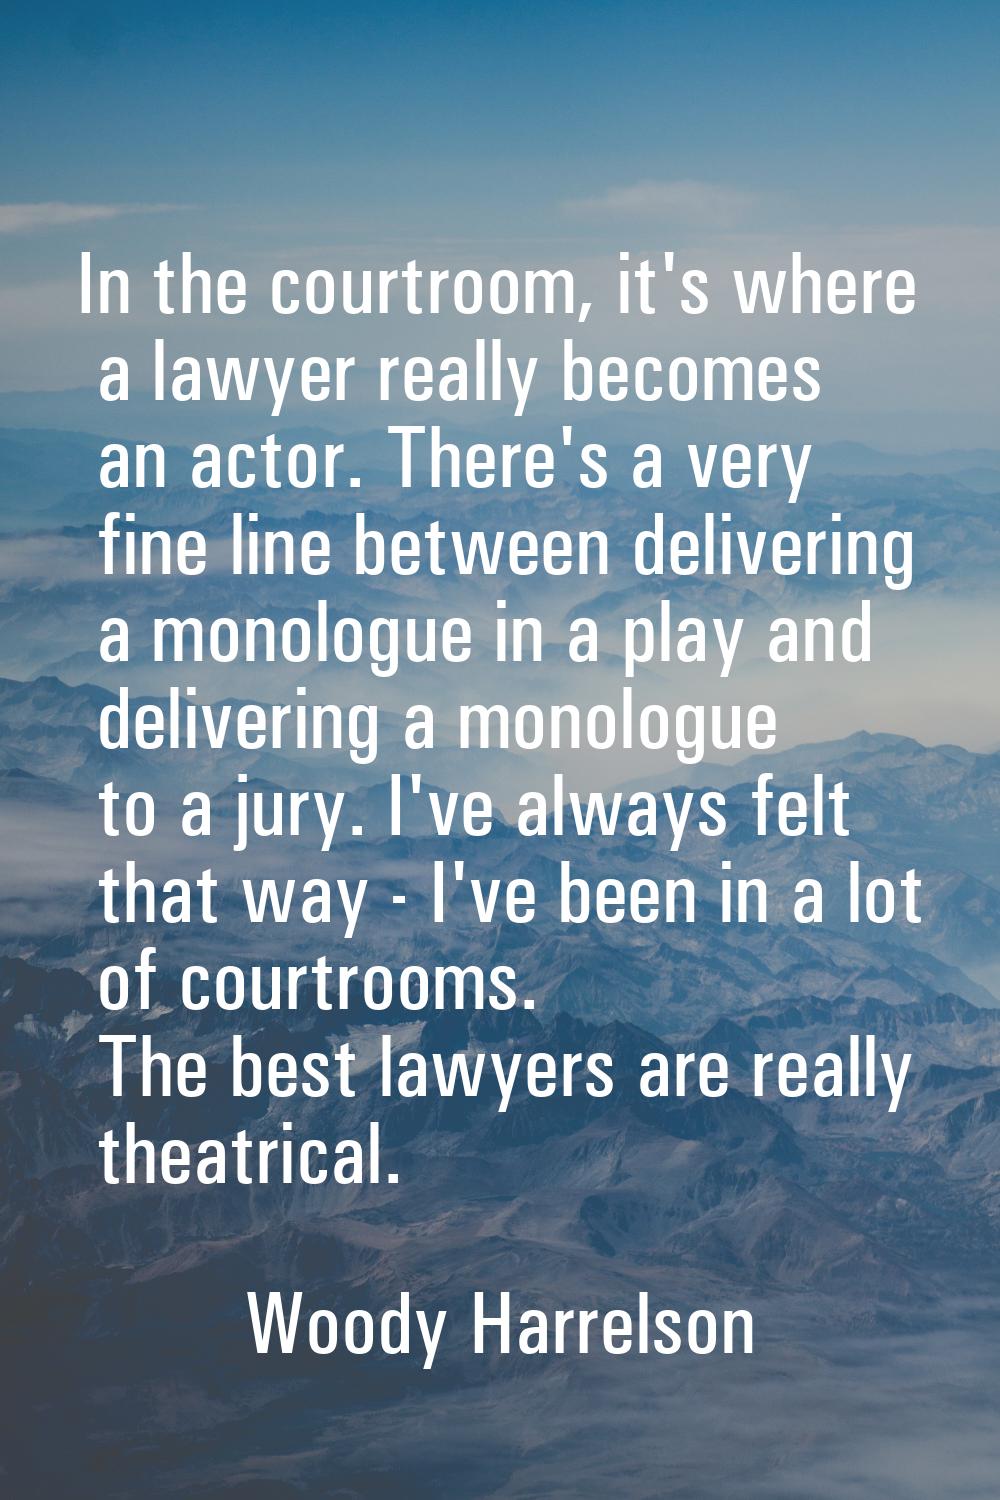 In the courtroom, it's where a lawyer really becomes an actor. There's a very fine line between del